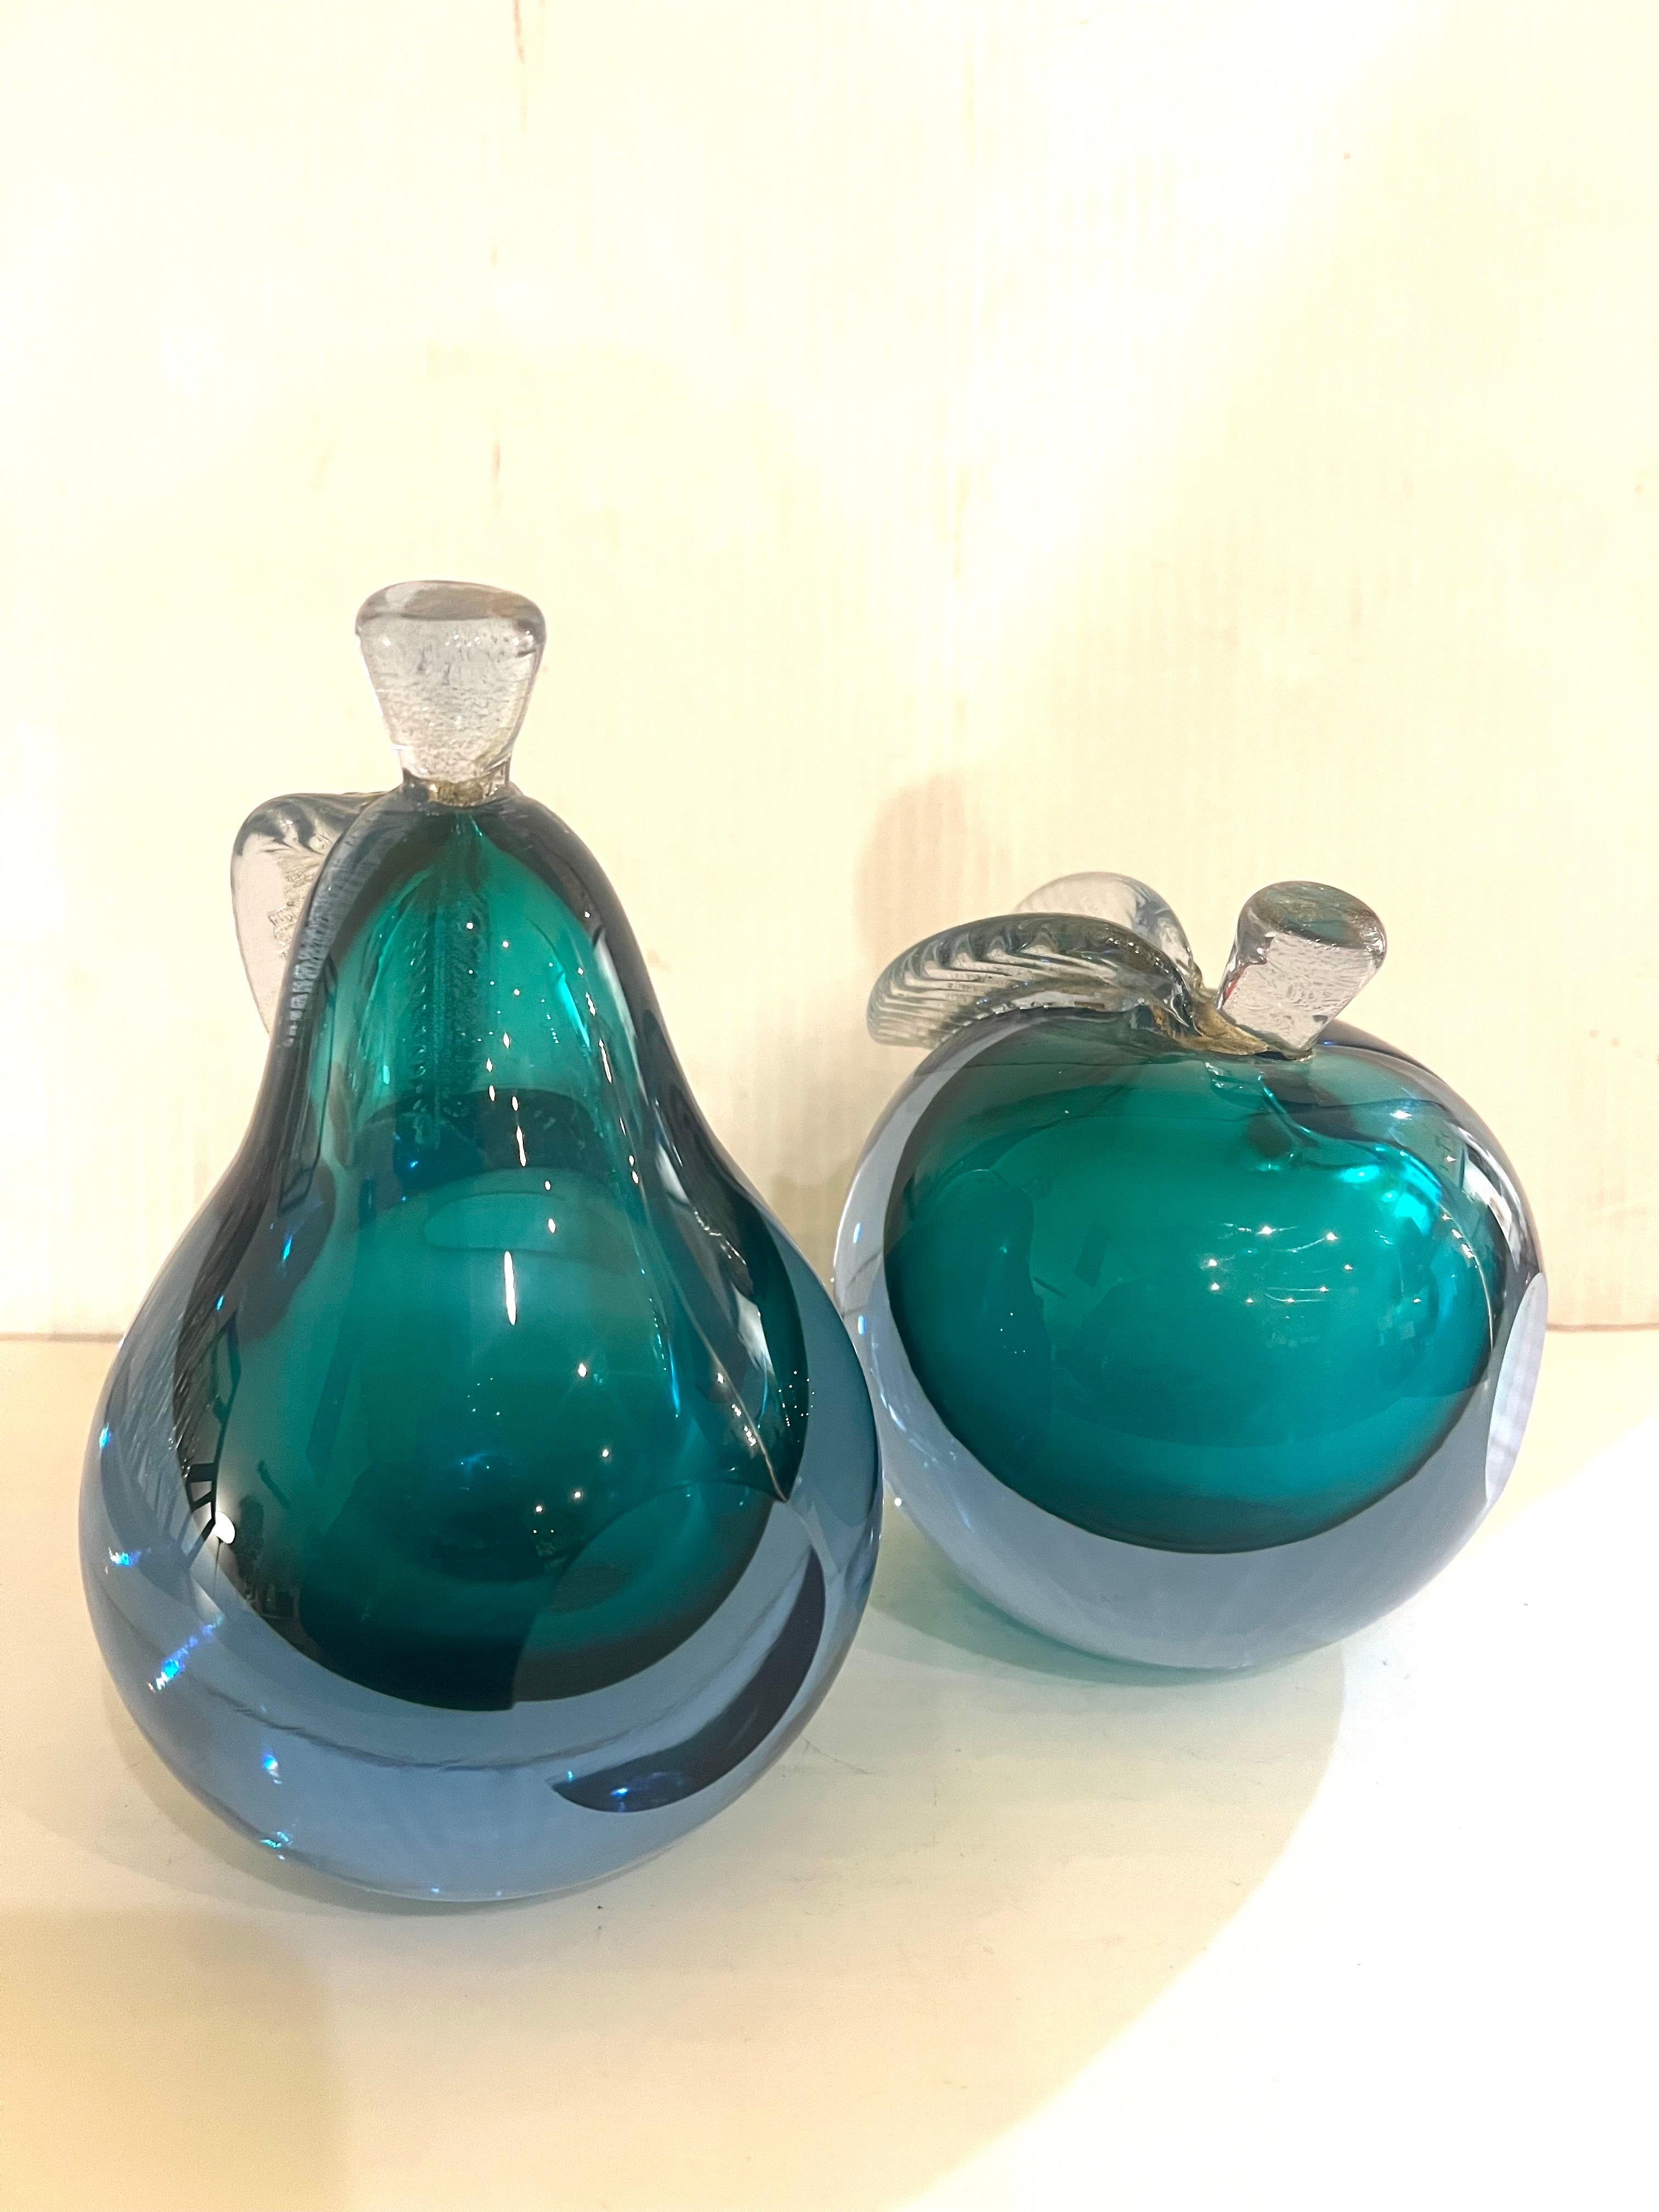 20th Century Livio Seguso Venetian Murano Italy Art Glass Apple and Pear Bookends Sculptures For Sale